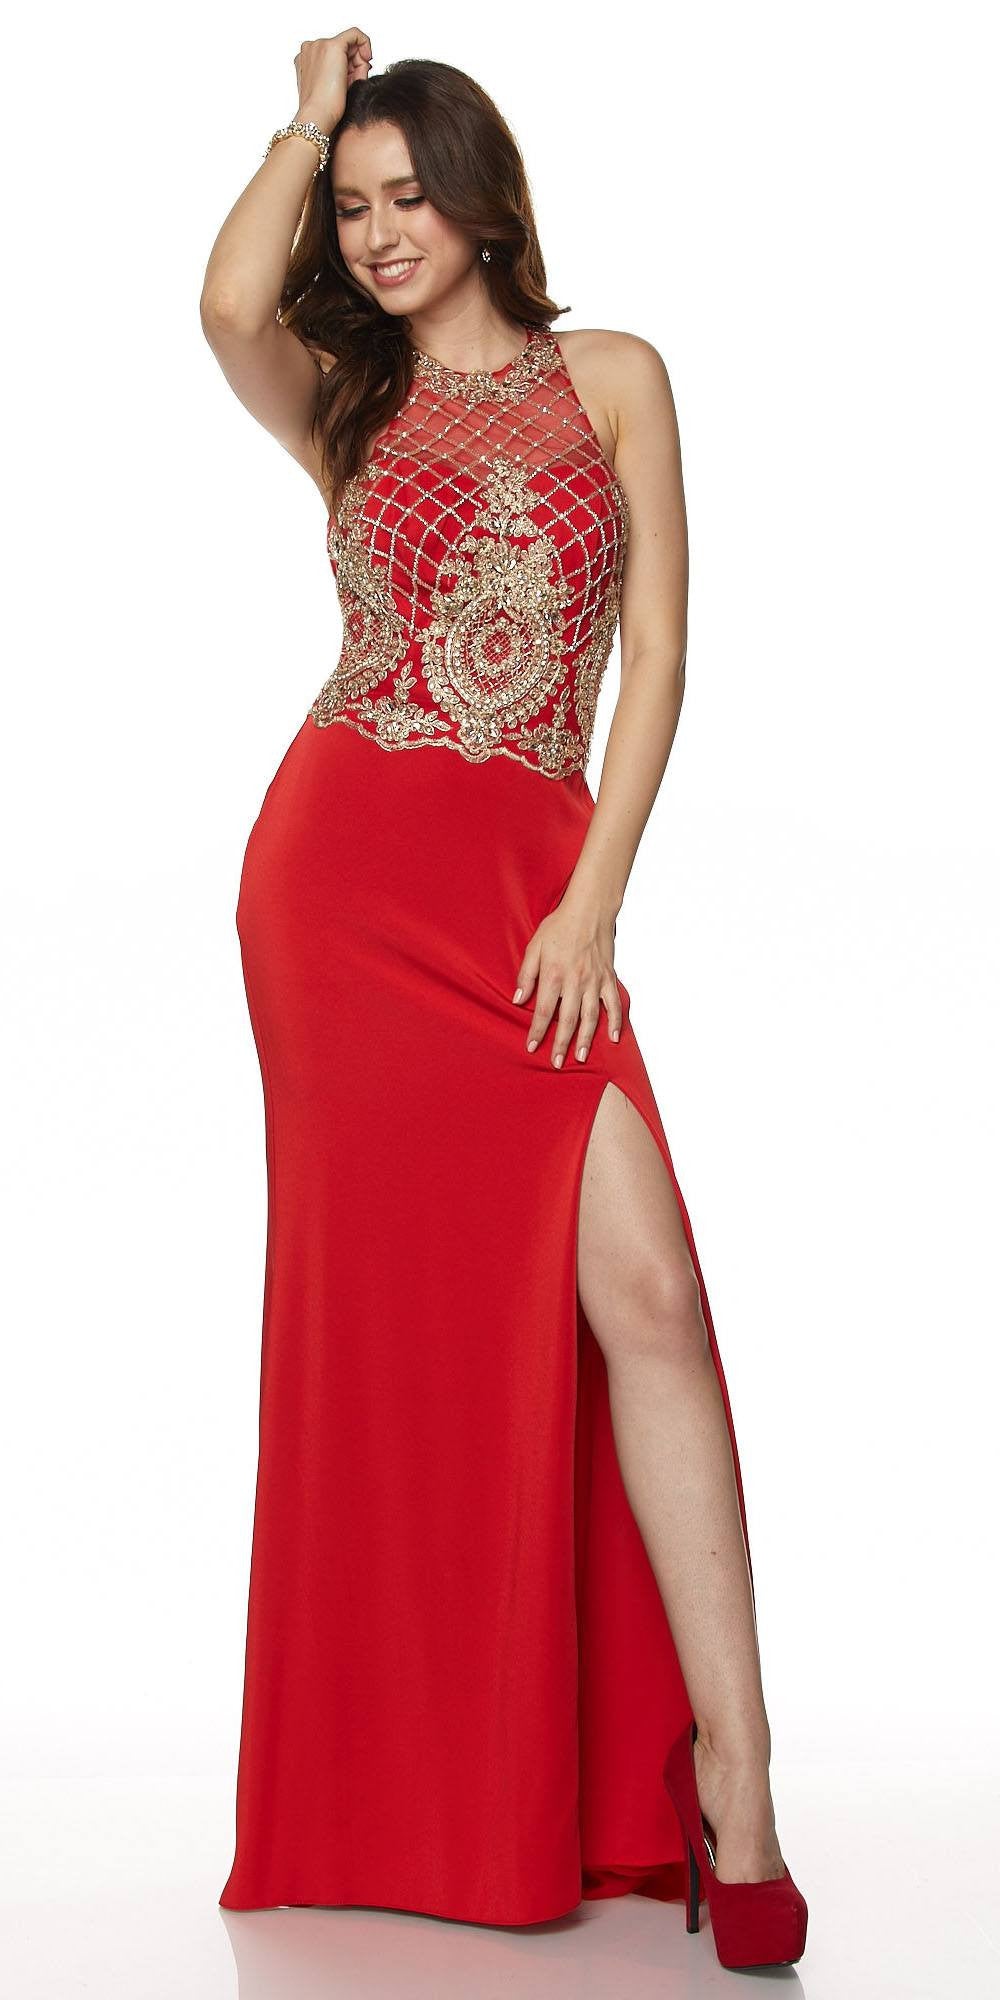 Juliet 614 Sexy Floor Length Formal Gown Red Cut Out Back Slit